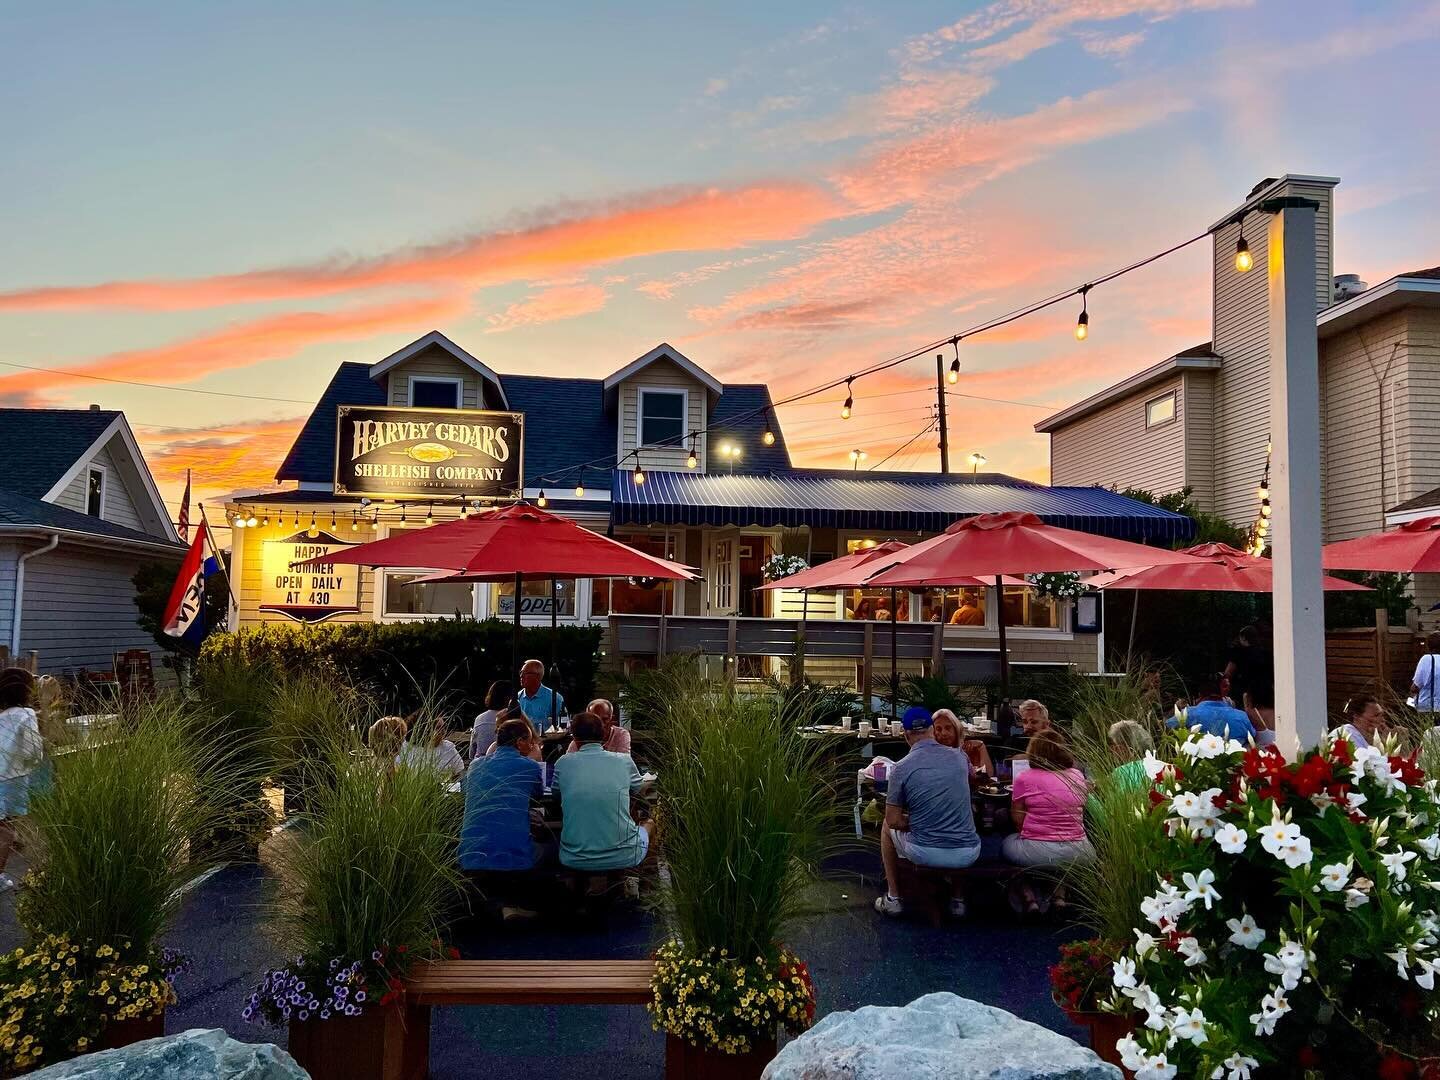 Sunsets after 5:30pm are upon us &amp; we&rsquo;re hiring for the 2024 season! We would love for you to join our team! 

Please apply through our website: www.harveycedarsshellfishco.com

We can&rsquo;t wait to meet you!